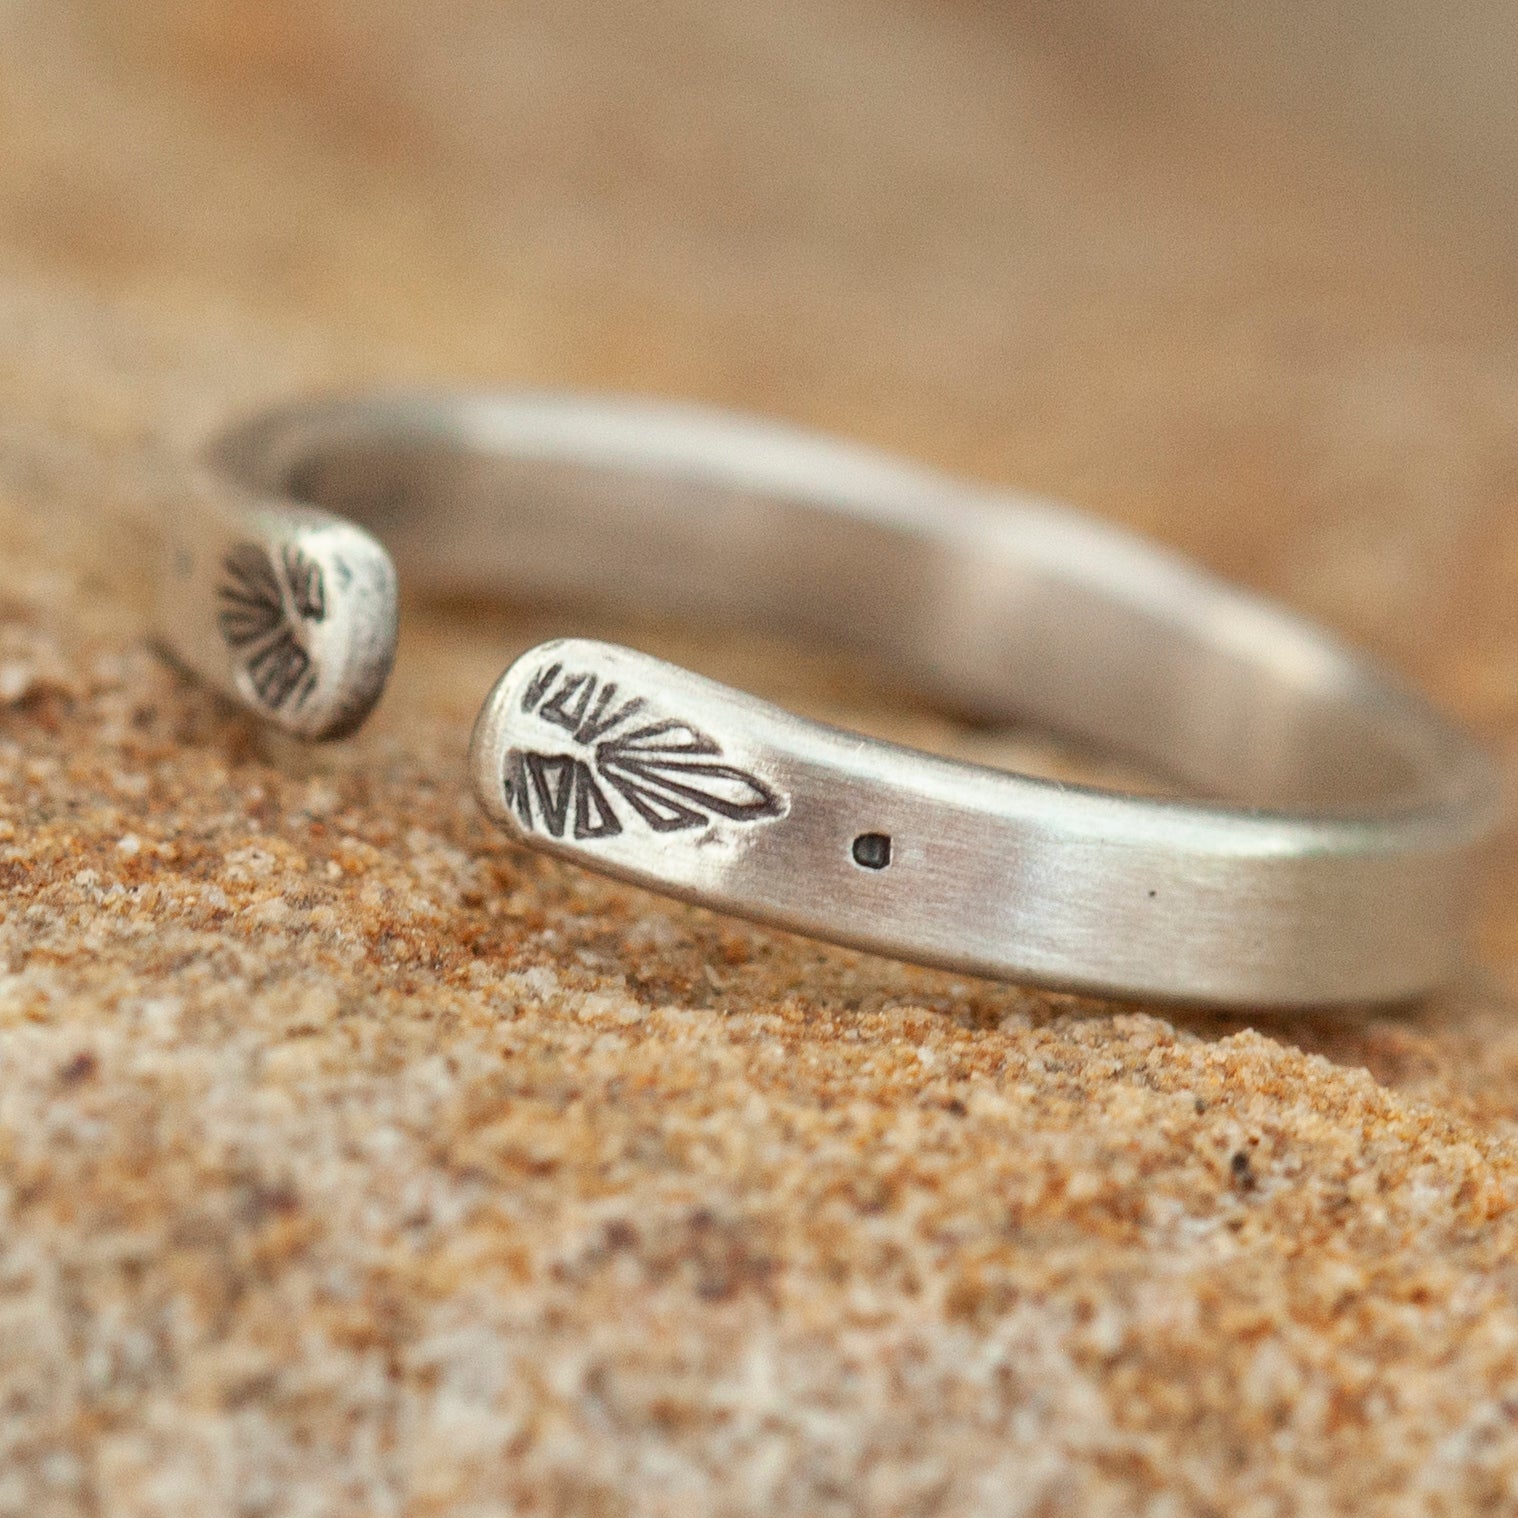 OOAK Ethnic ring in silver #3 • adjustable size starting at 53 (ready-to-ship)